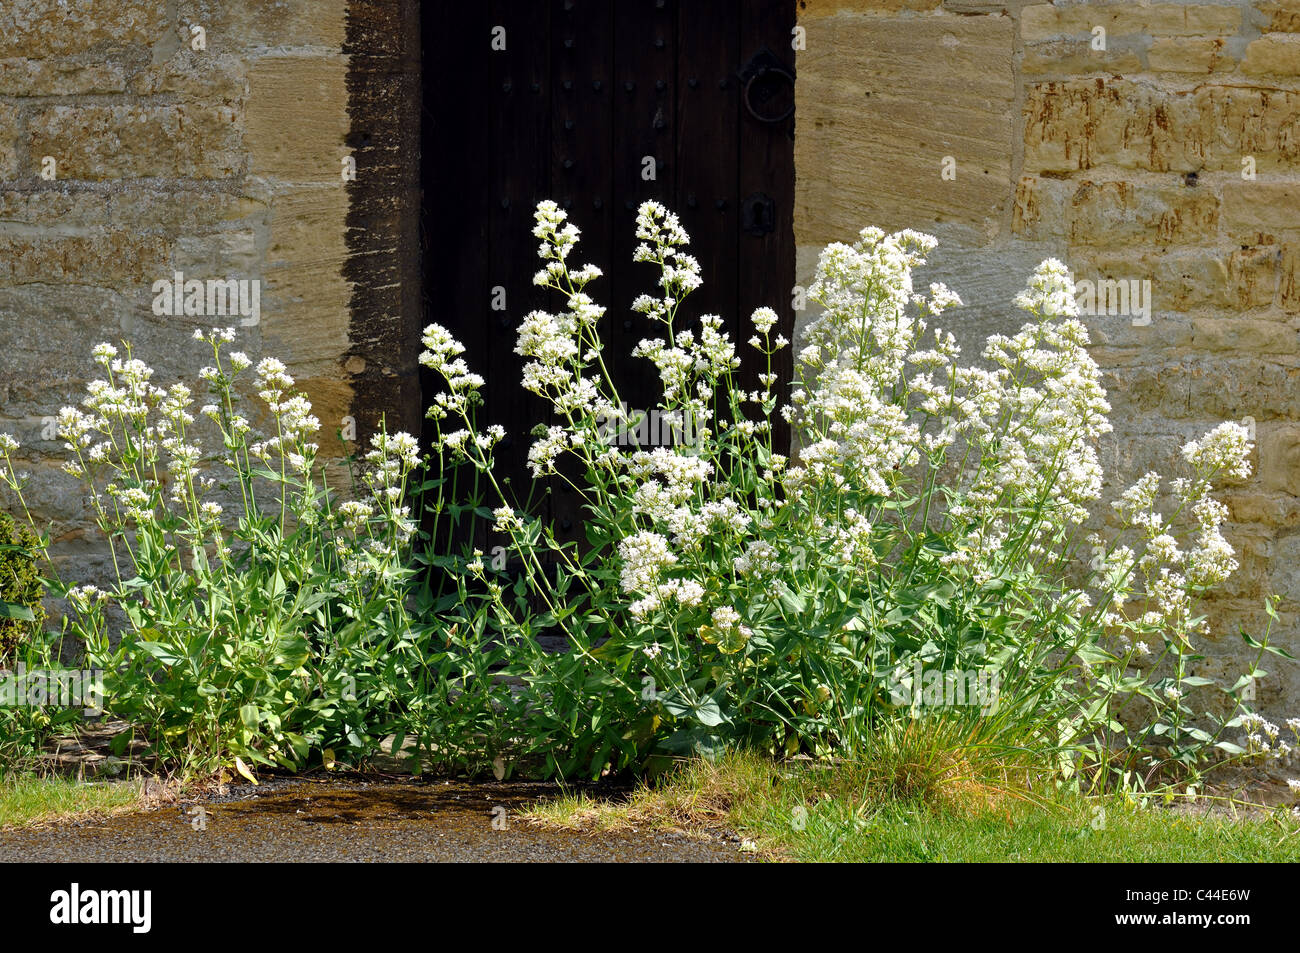 White valerian growing in a churchyard Stock Photo